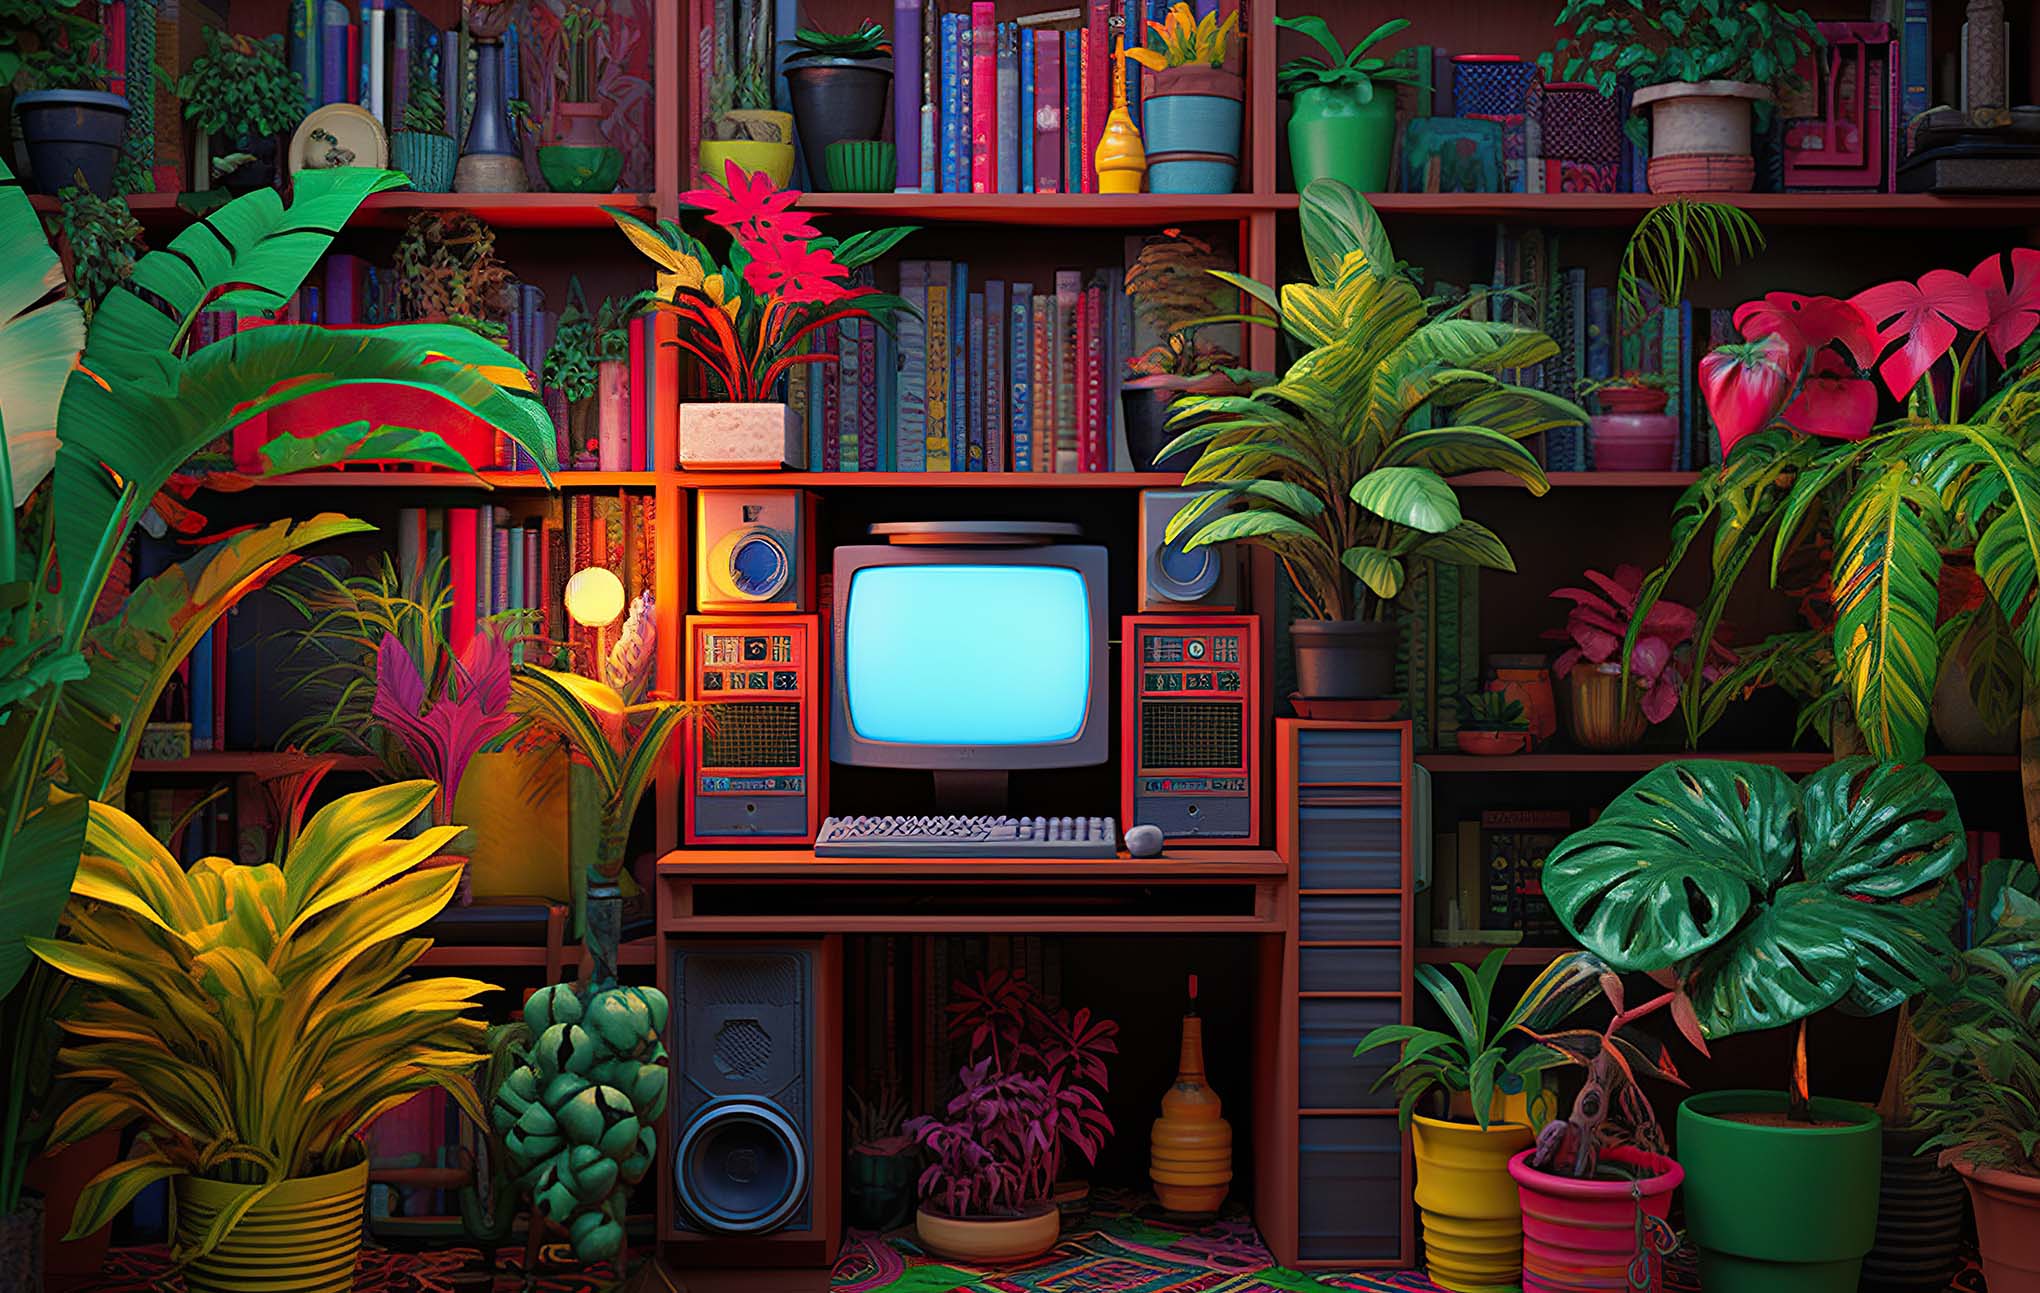 A vibrant scene featuring a vintage computer on a desk surrounded by lush indoor plants and colorful bookshelves filled with books, set in a cozy room illuminated by soft lighting.